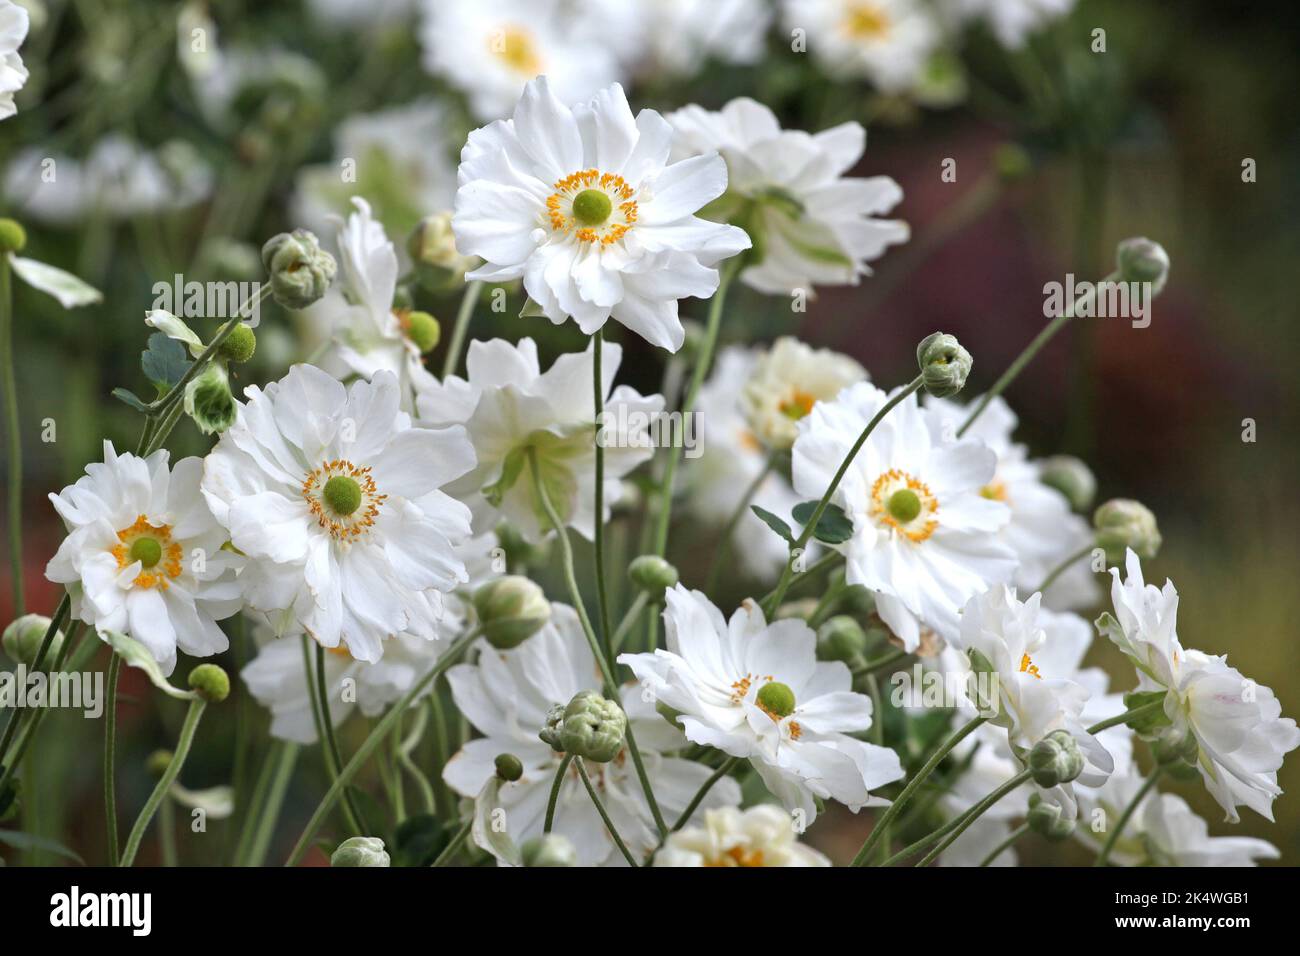 Japanese anemone 'Whirlwind' in flower. Stock Photo